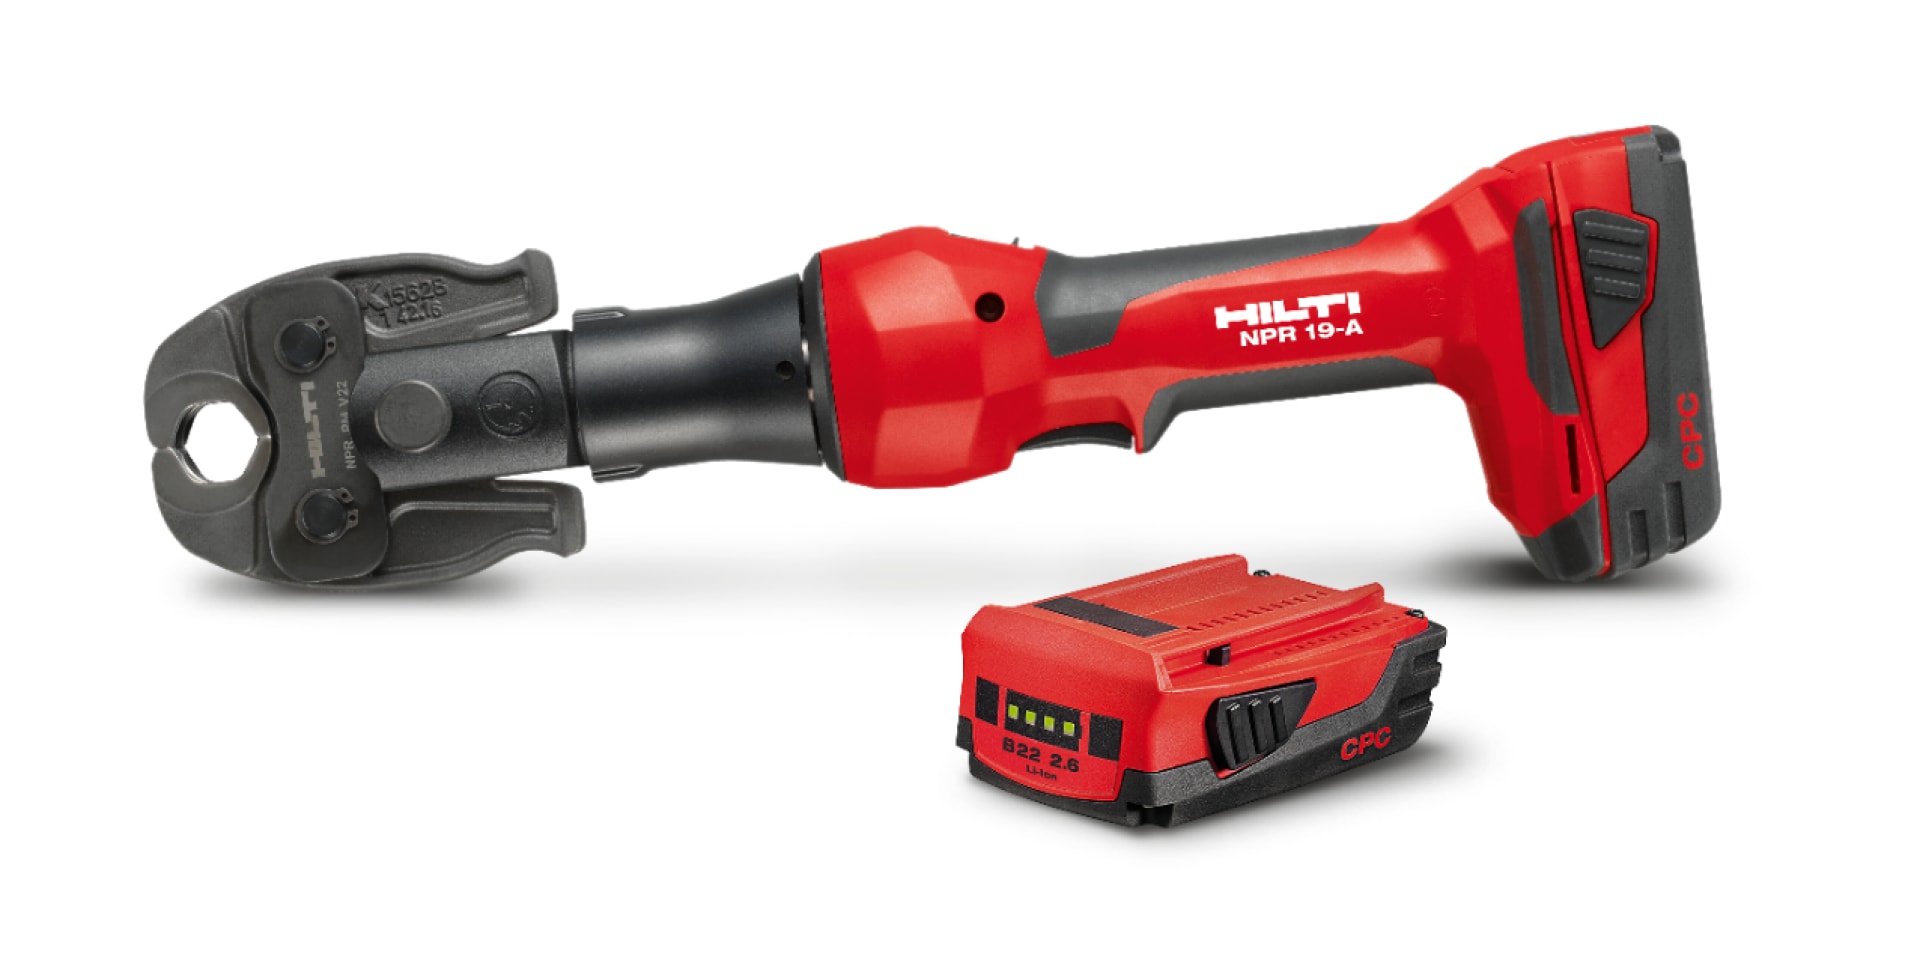 NPR 19-A cordless pipe press tool with battery 